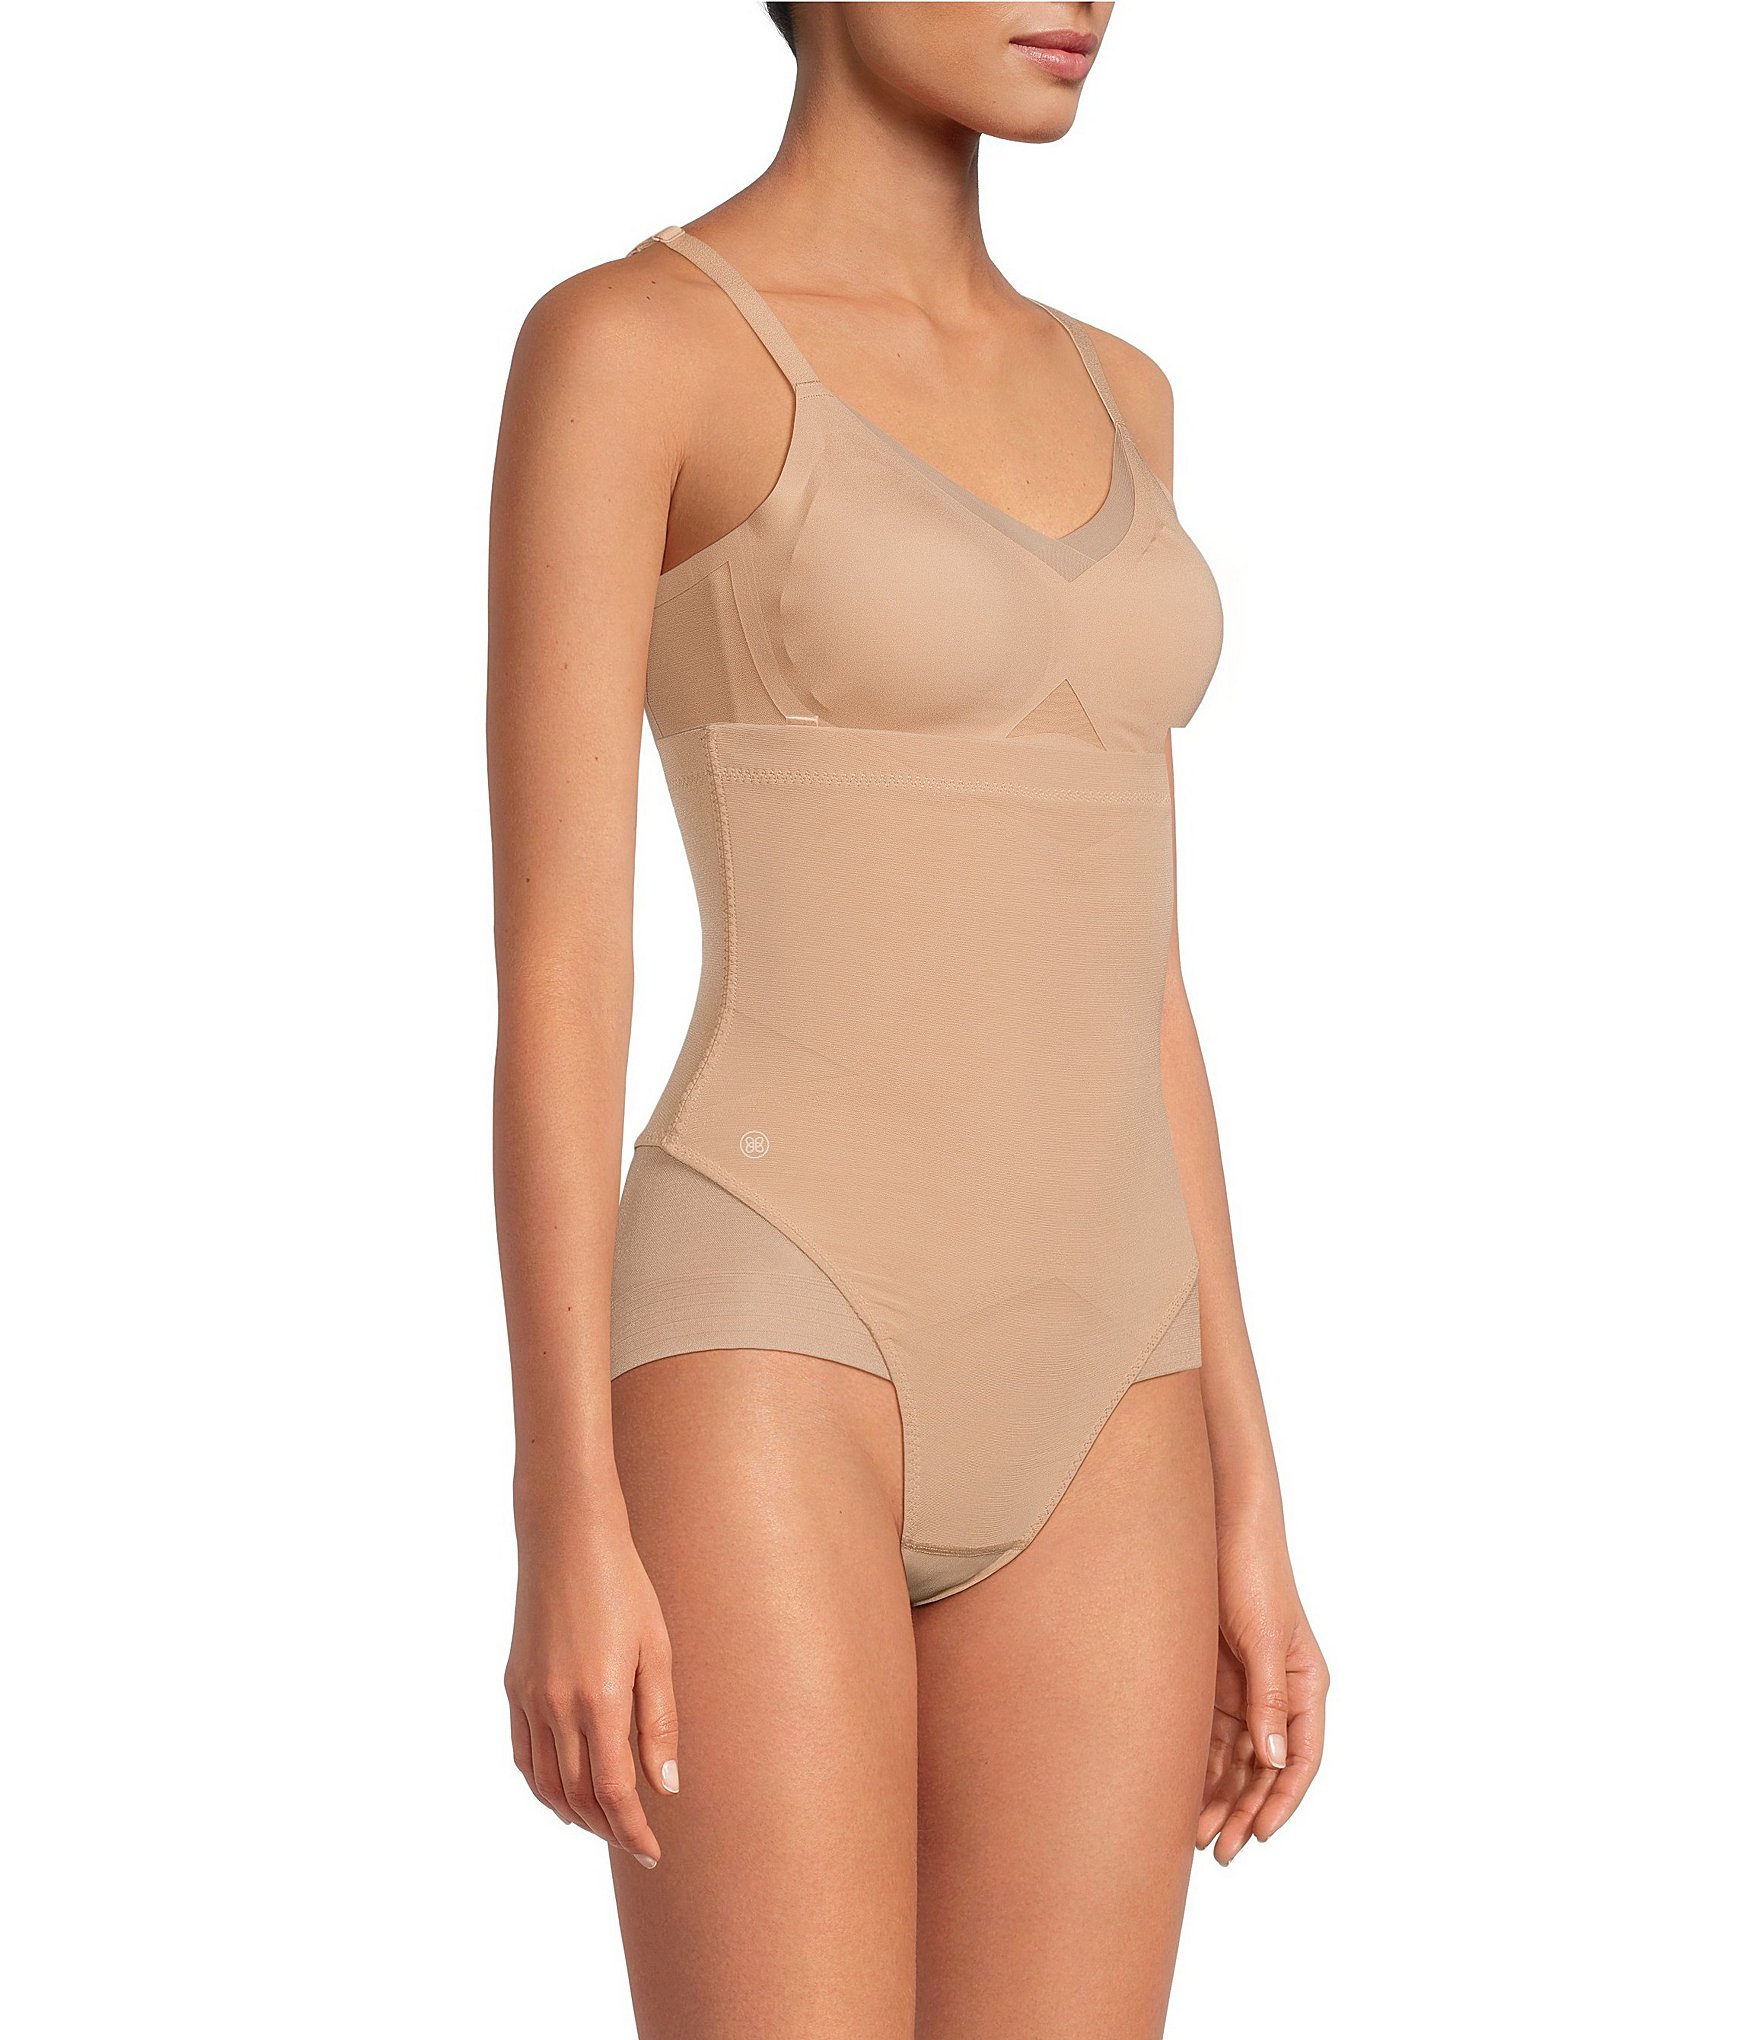 Honeylove SuperPower High Waisted Shapewear Thong in Sand Size Medium NWT